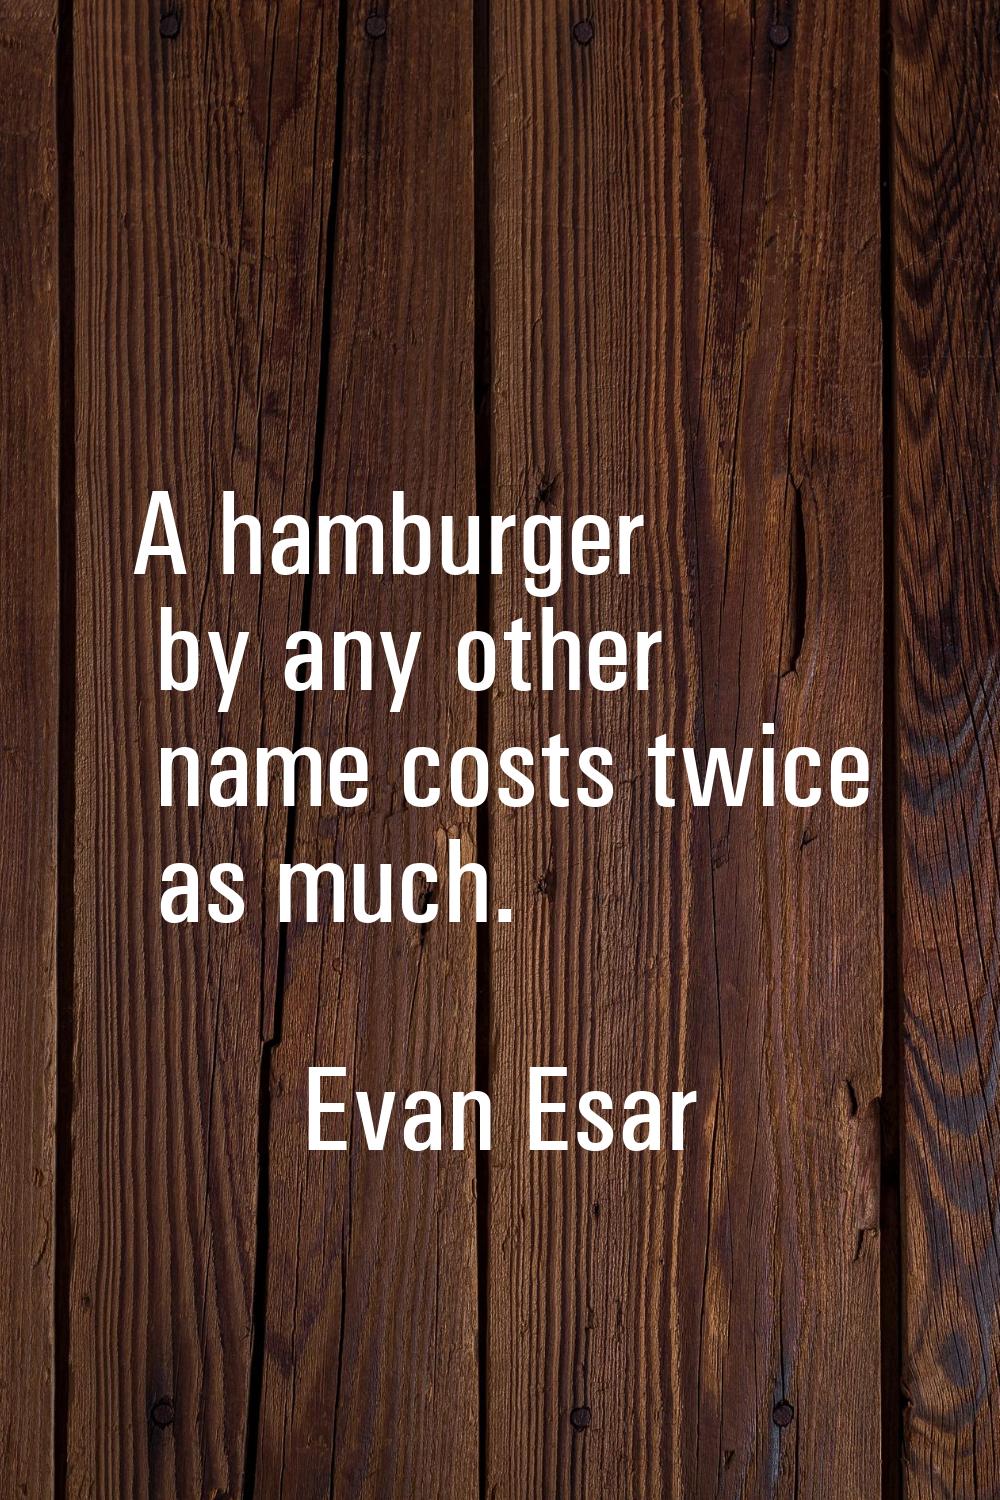 A hamburger by any other name costs twice as much.